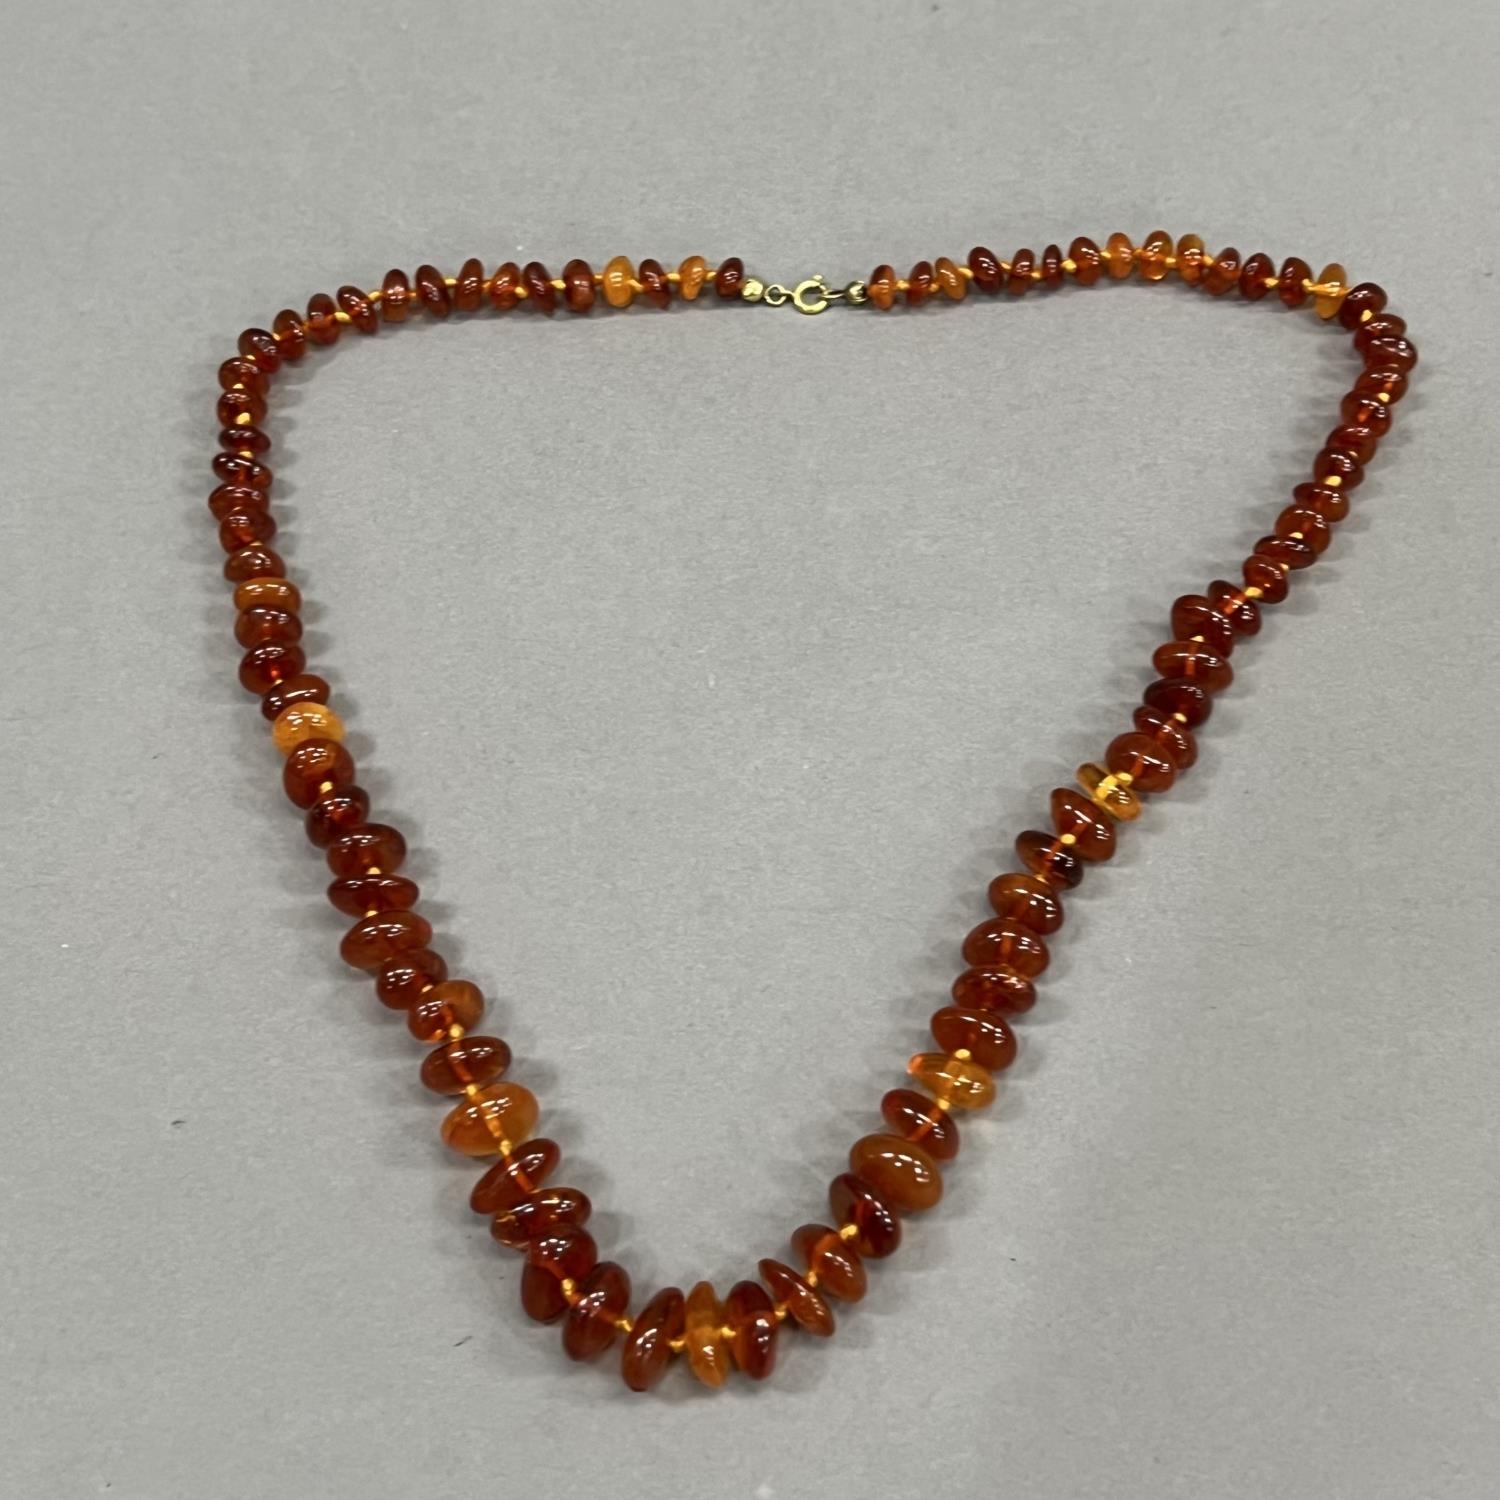 A necklace of graduated roughly oval Baltic amber beads fastened with a rolled gold bolt ring,